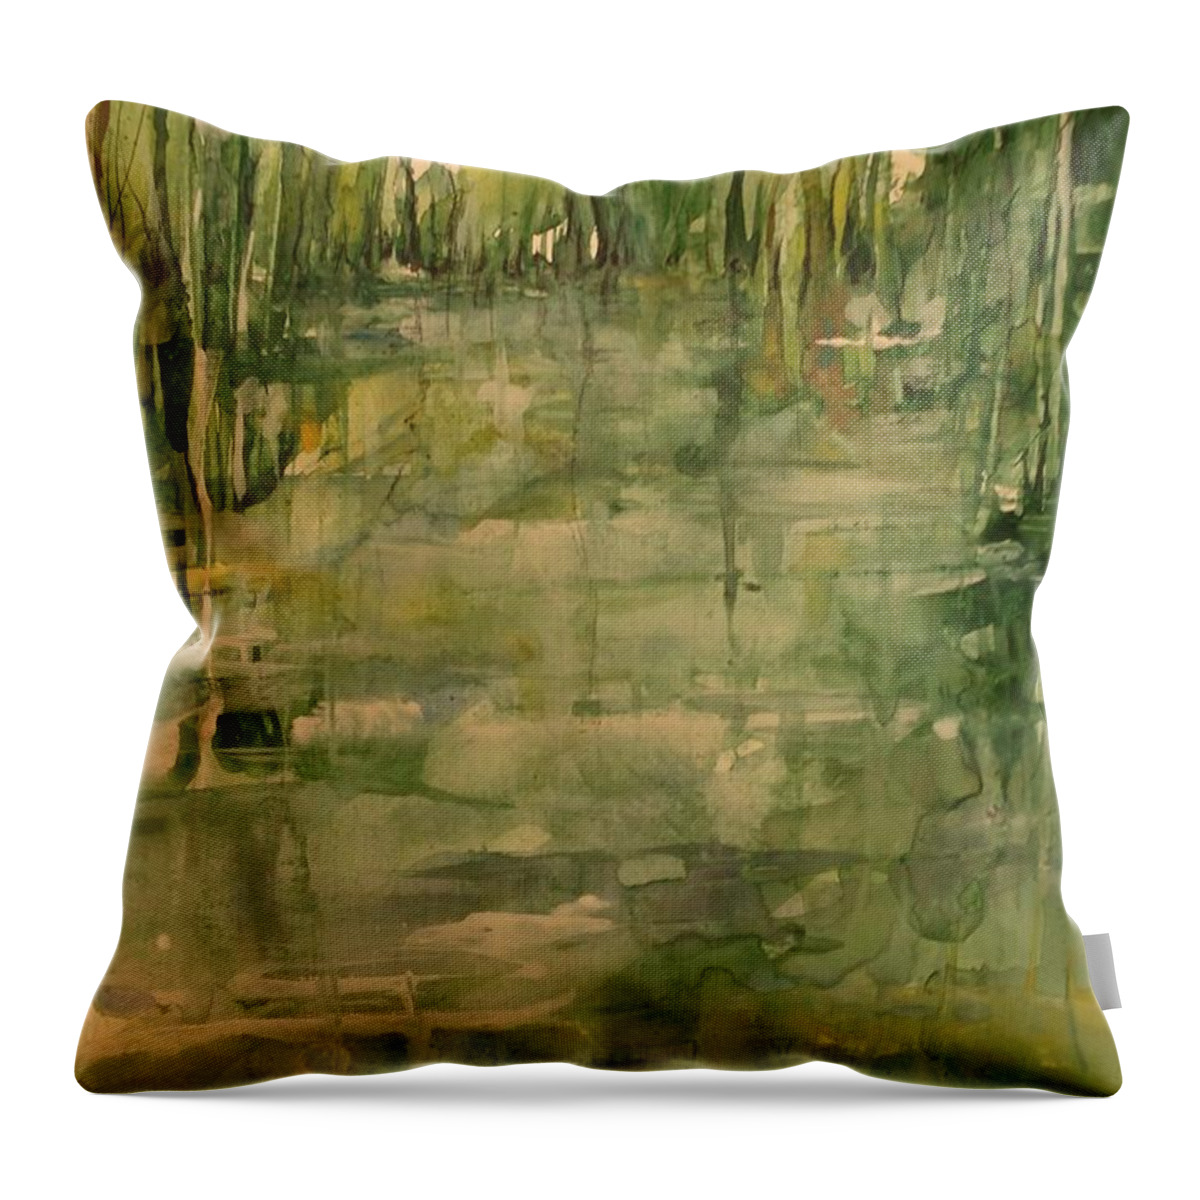 Honey Island. Swamp Throw Pillow featuring the painting Honey Island Swamp in Green by Robin Miller-Bookhout